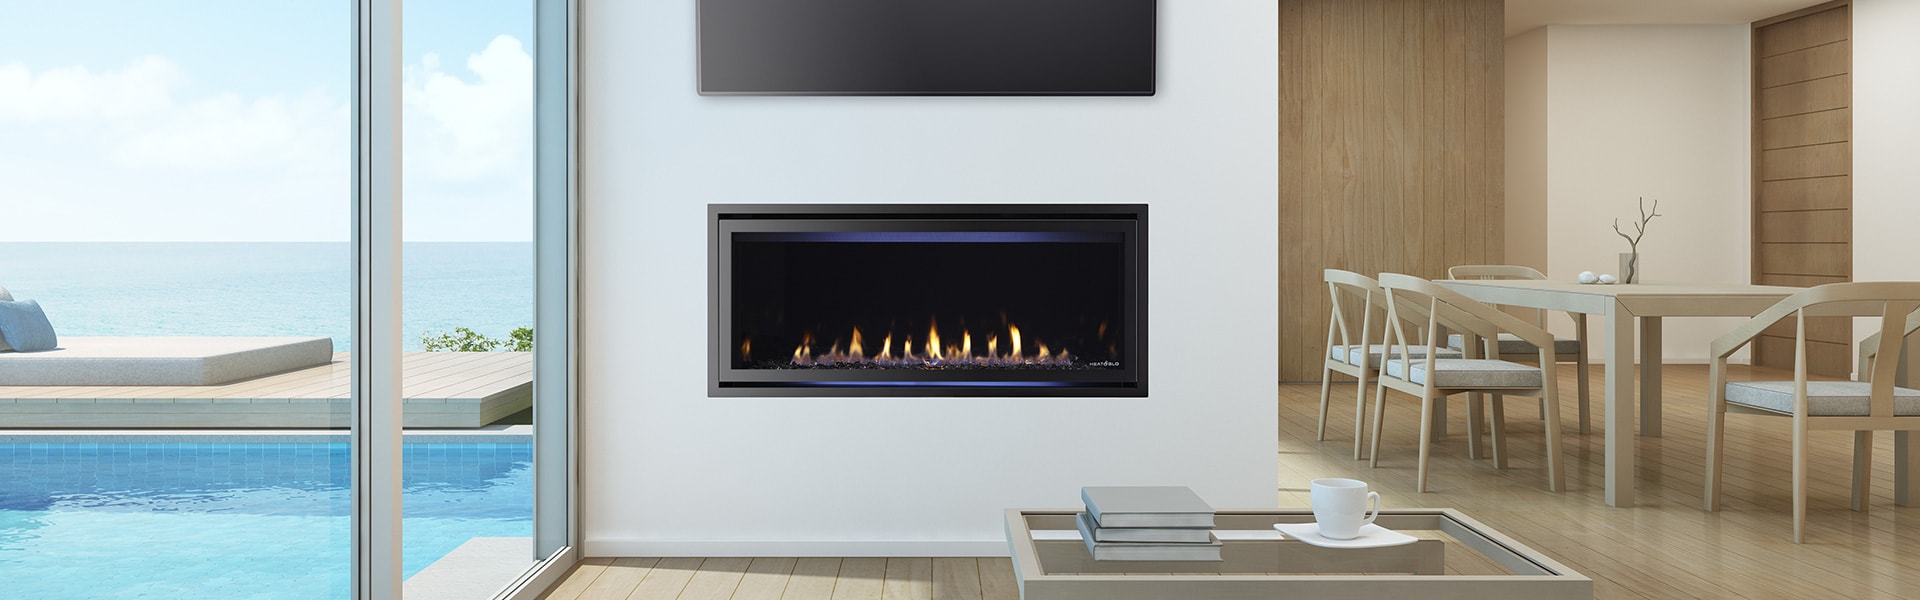 Gas Fireplace Wall Insert Awesome Cosmo 42 Gas Fireplace